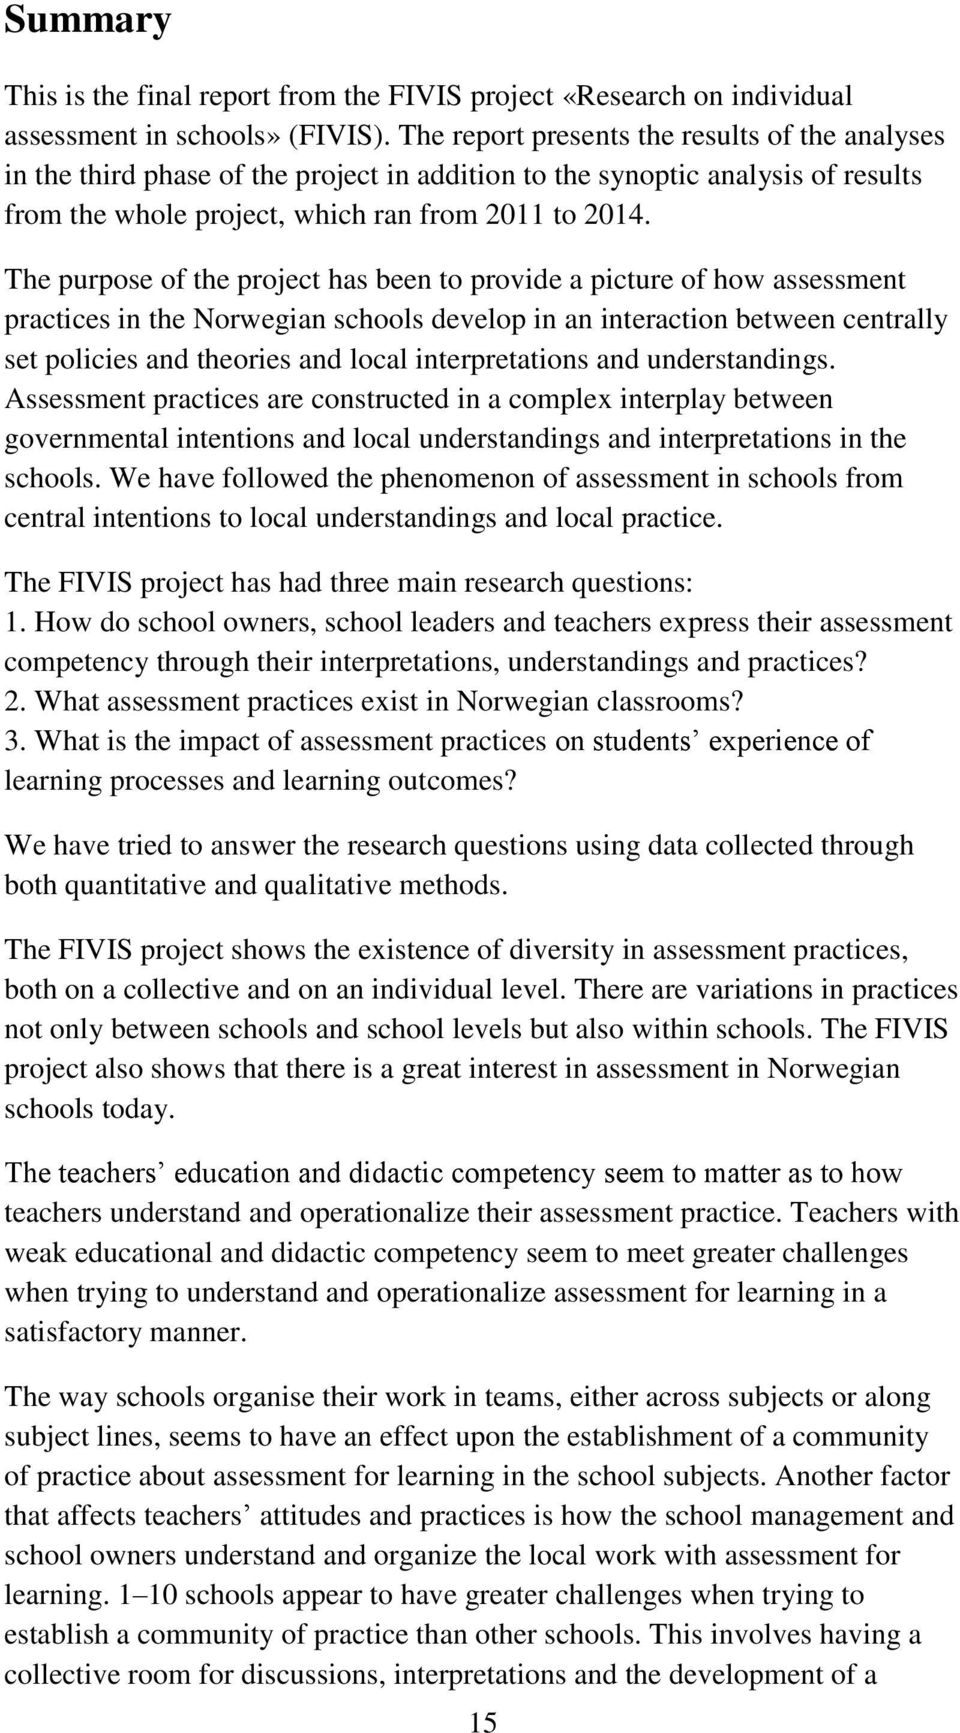 The purpose of the project has been to provide a picture of how assessment practices in the Norwegian schools develop in an interaction between centrally set policies and theories and local